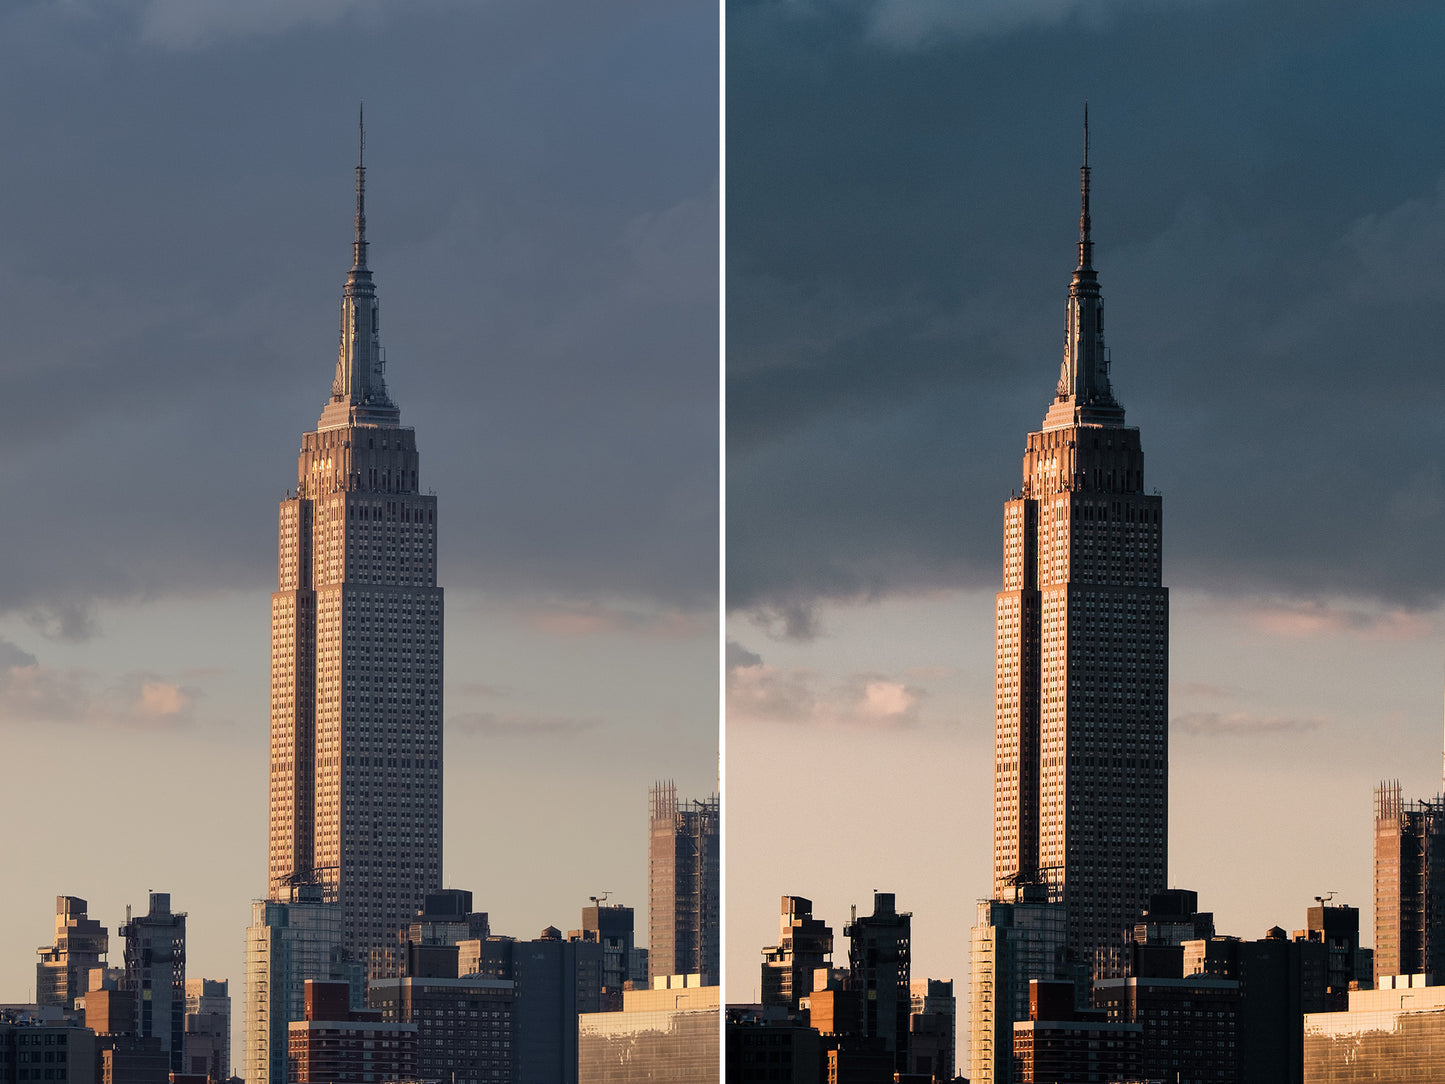 URBAN STONE vol.1 — Lightroom Presets and Capture One Styles